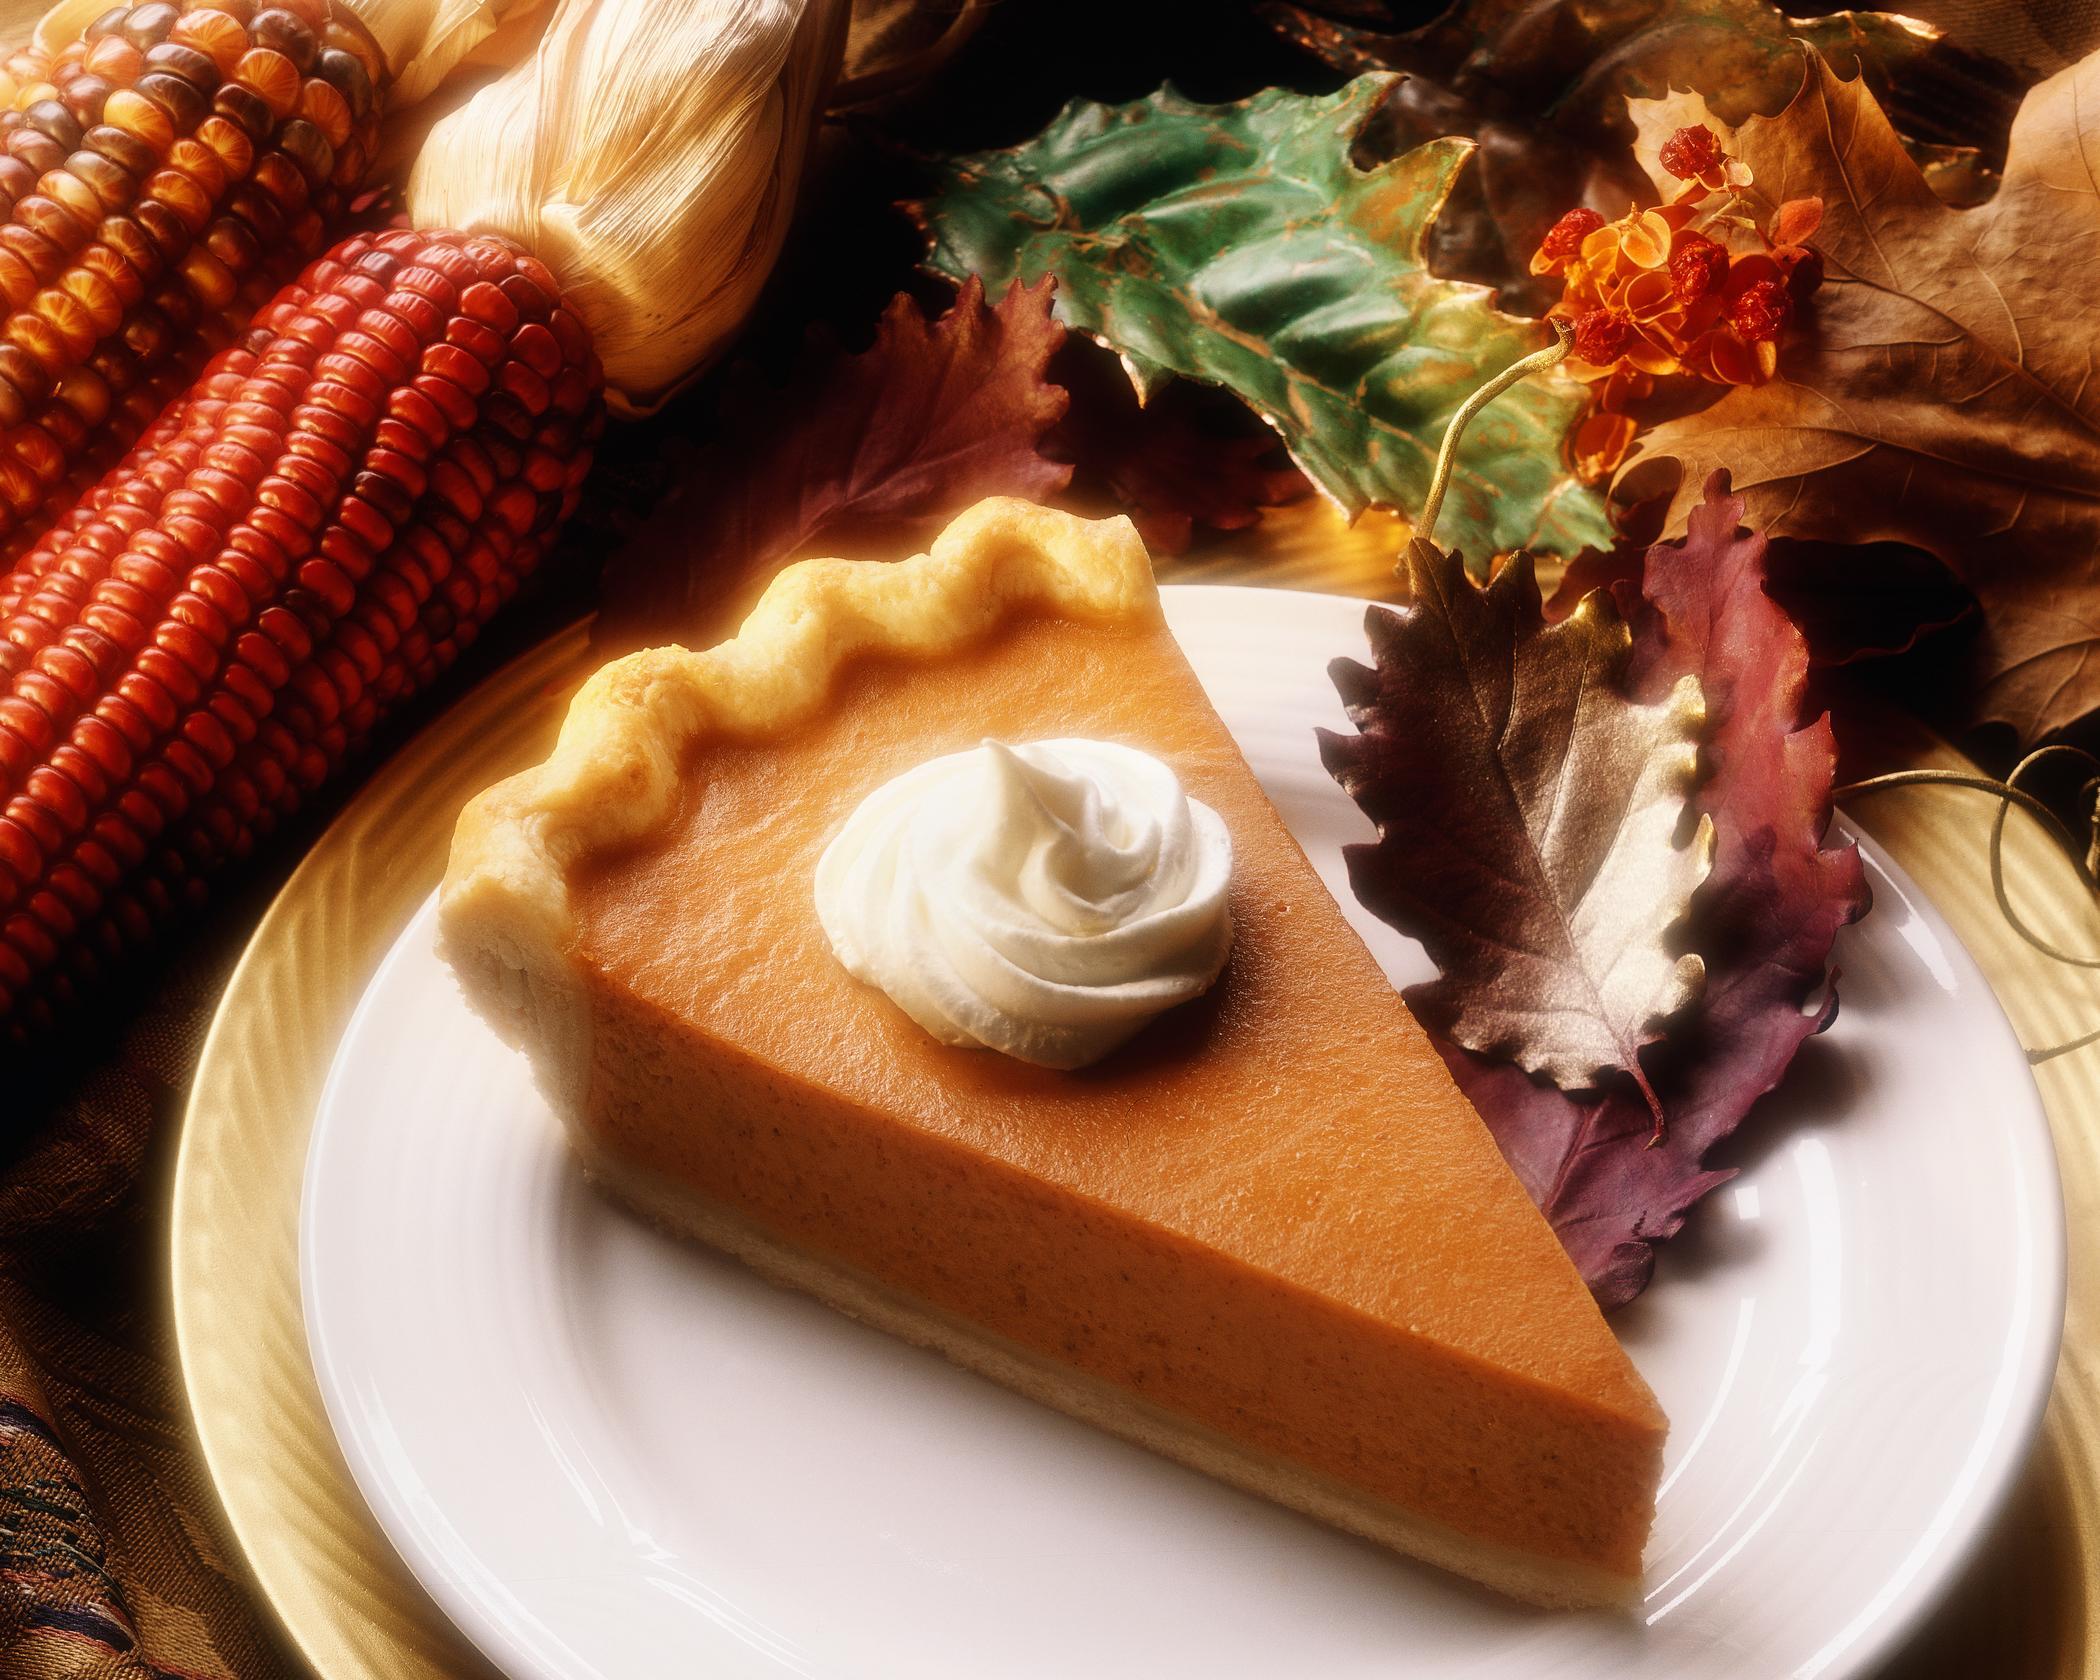 Swhex 7104 2003 Holiday Image Collection Autumn Pumpkin Pie